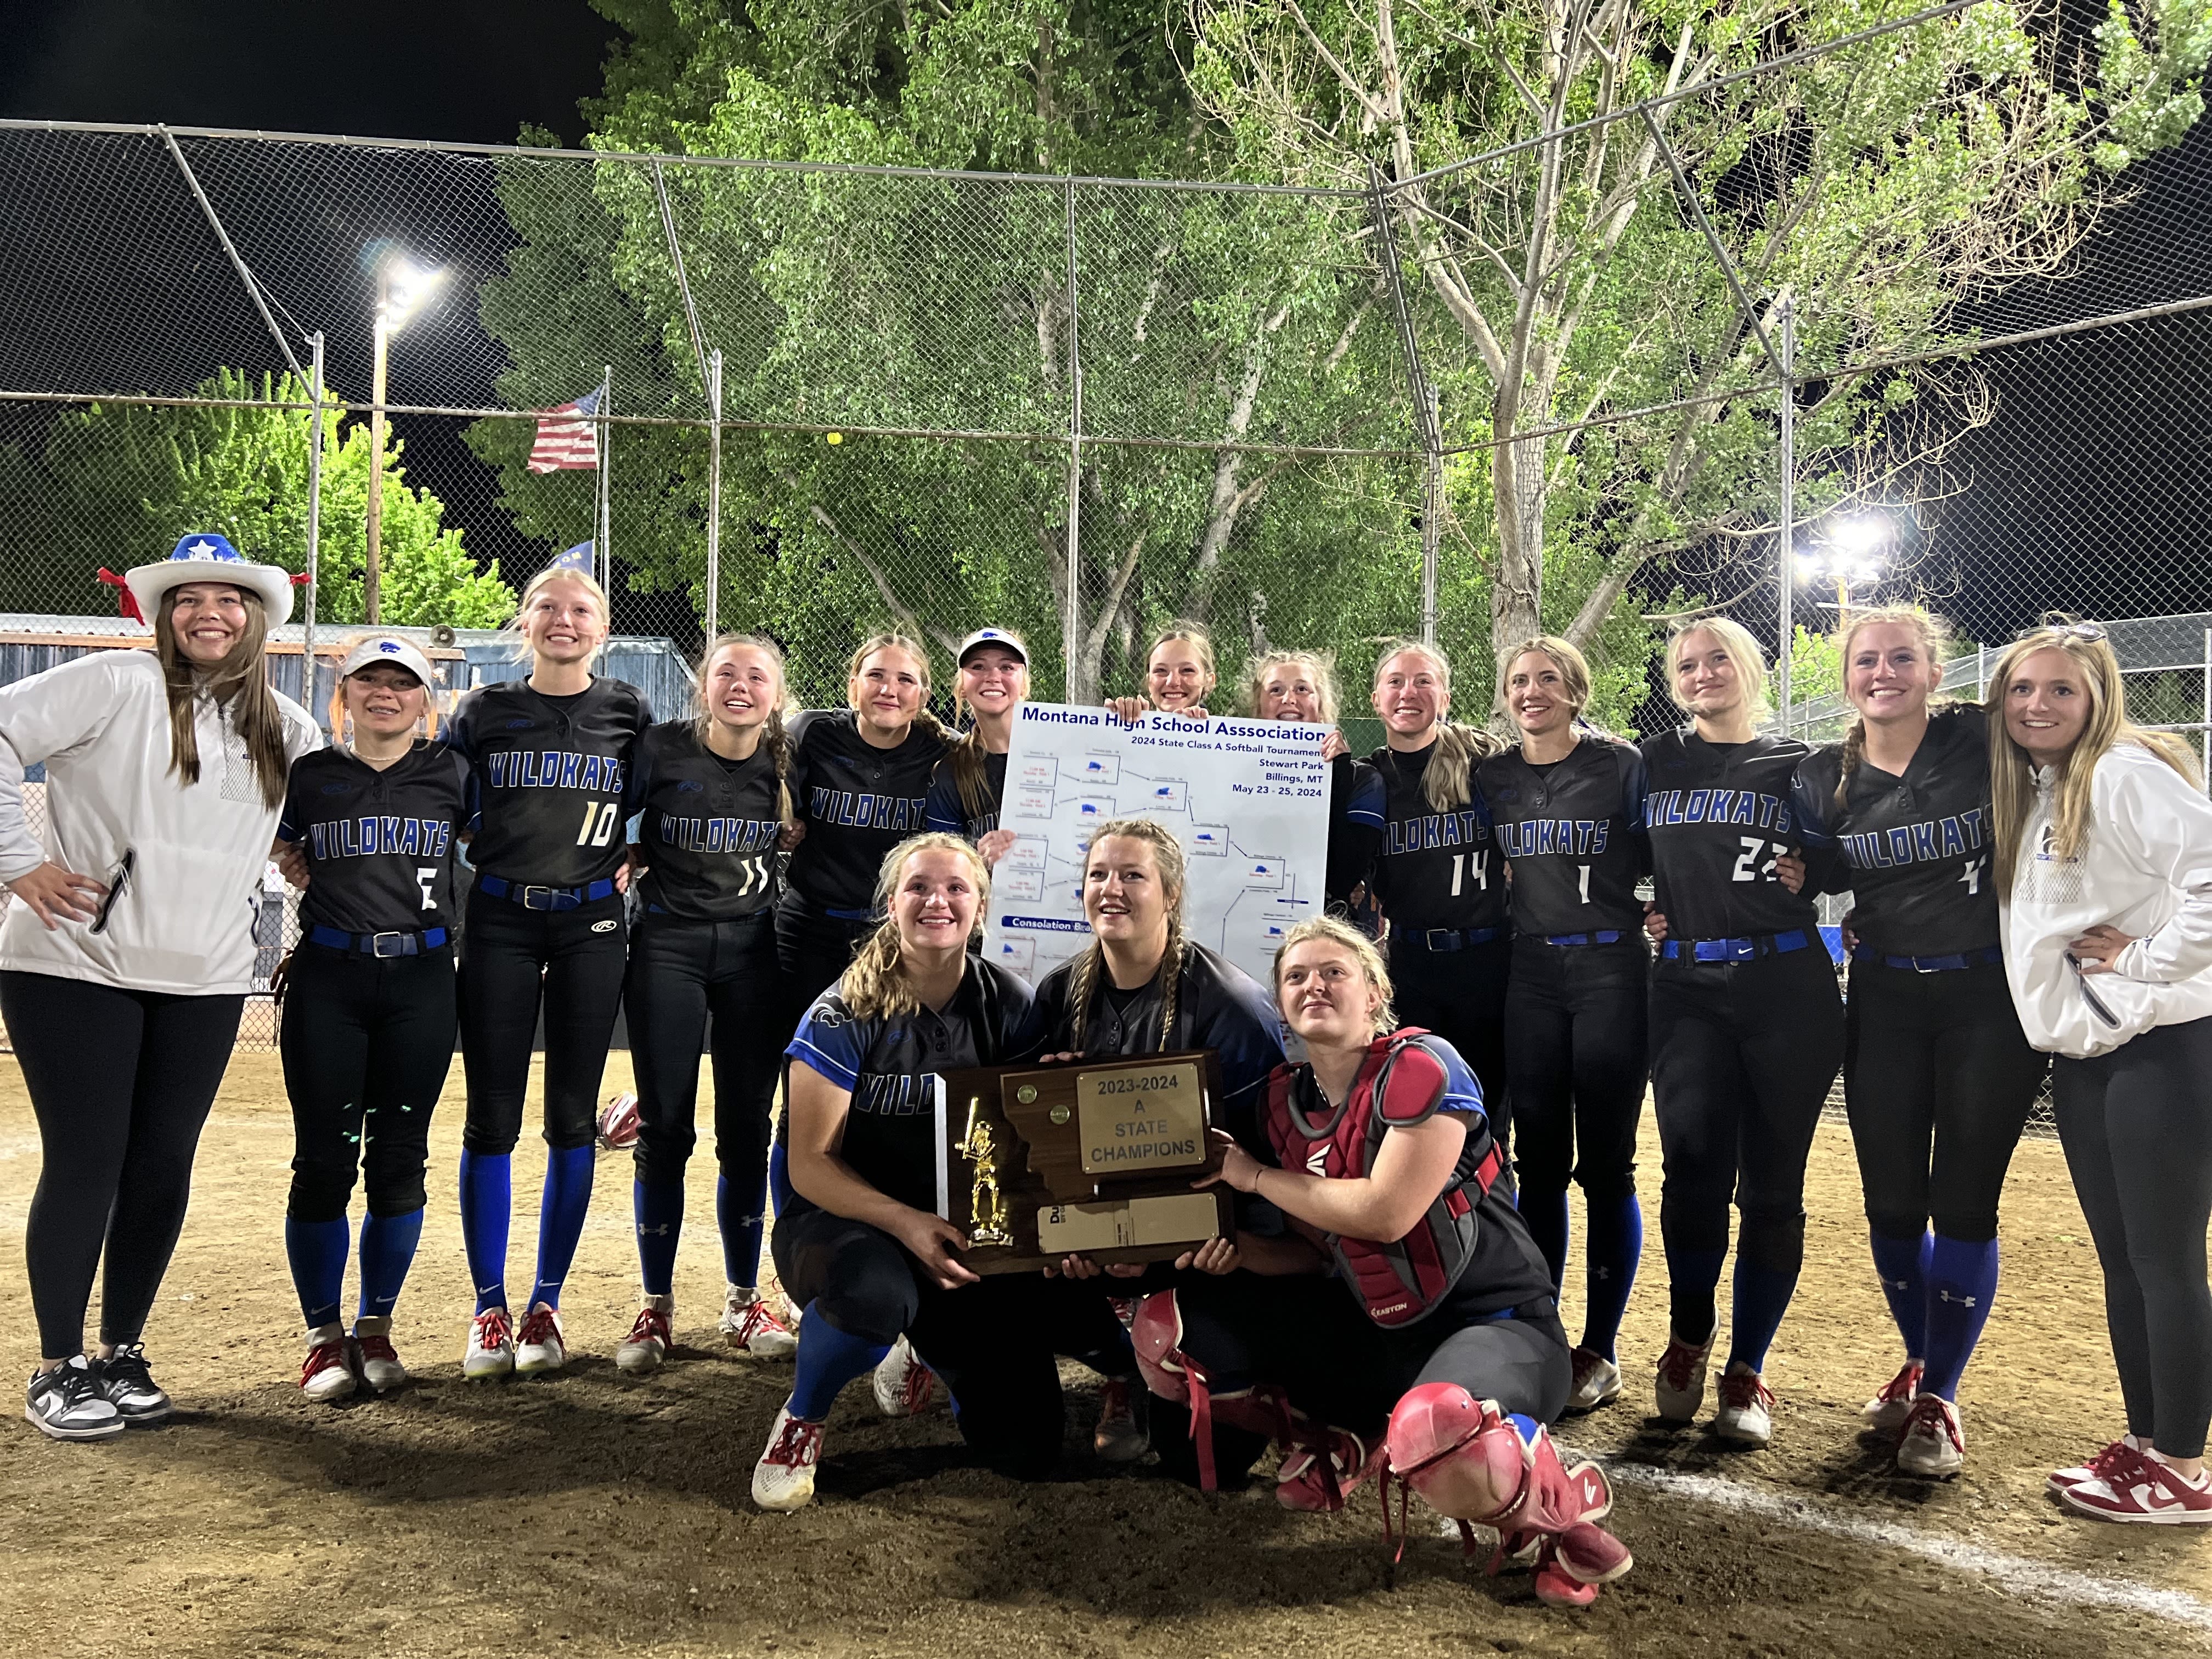 'Nothing but heart': Columbia Falls rallied back to win second straight softball championship